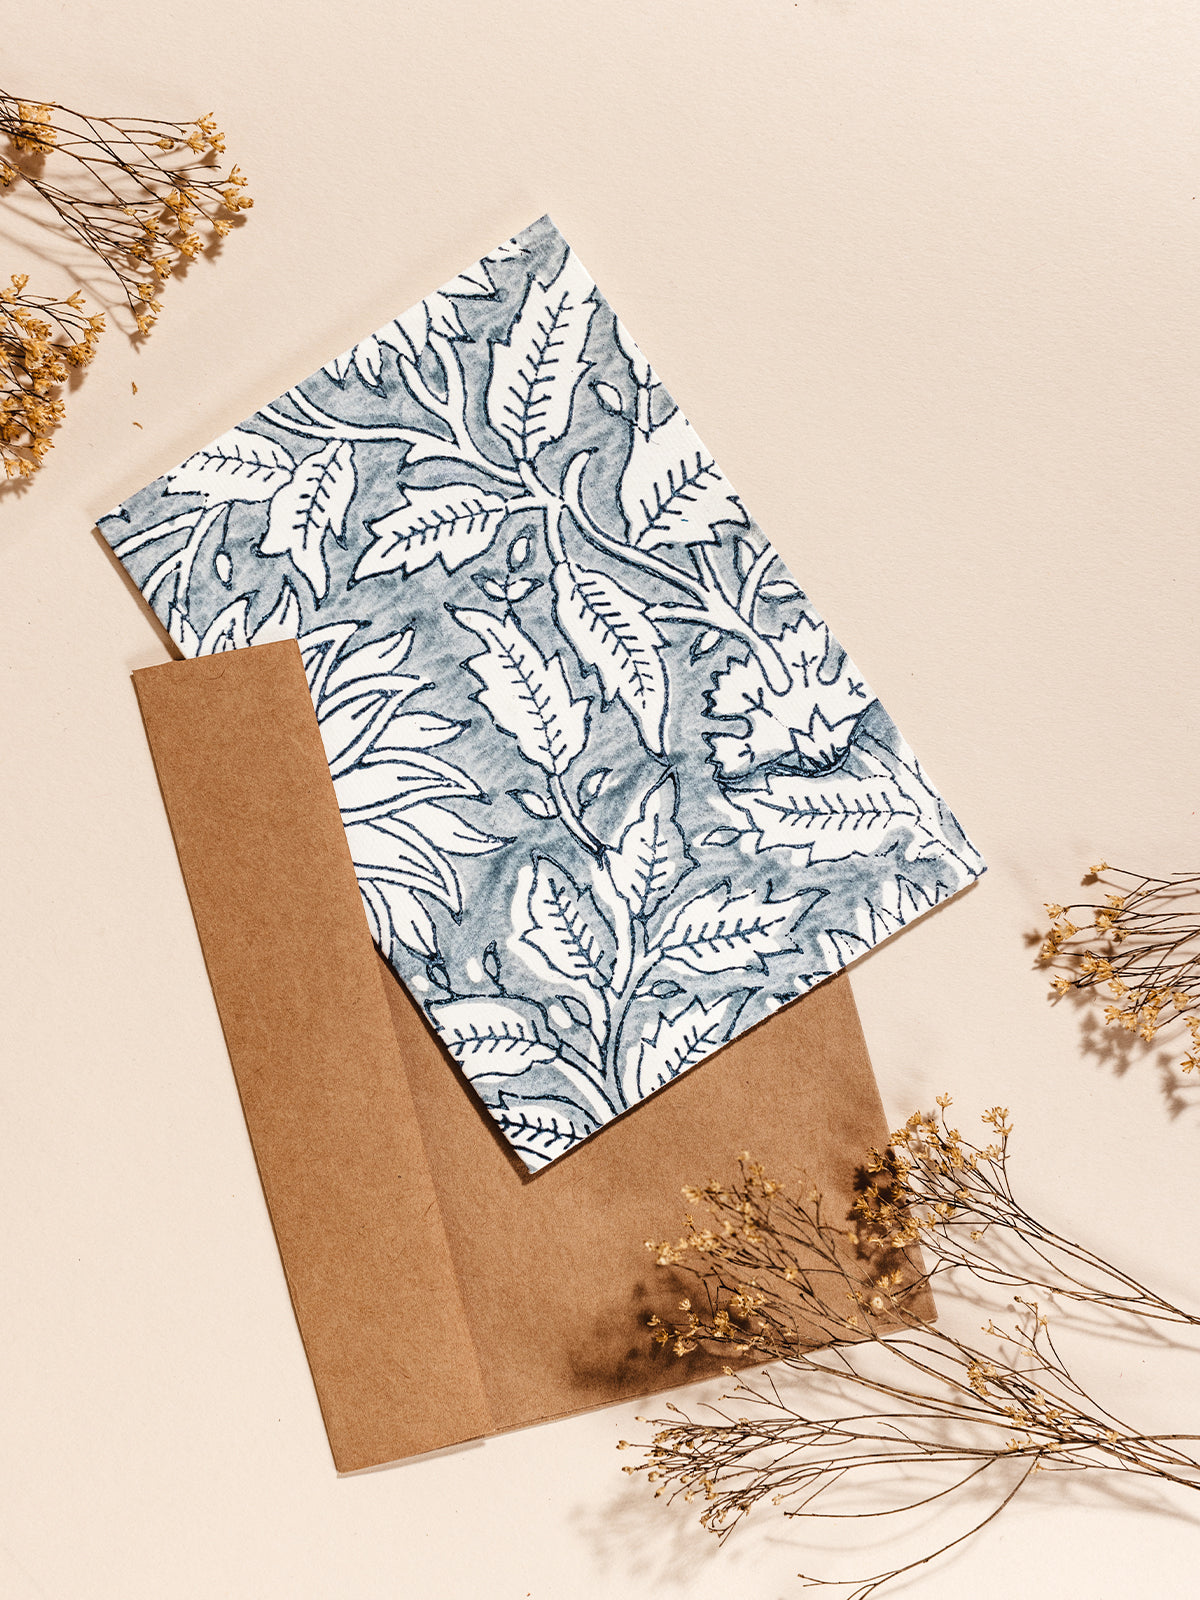 Hand drawn blue floral stationary with parchment brown envelopes on cream surface with dried flowers.